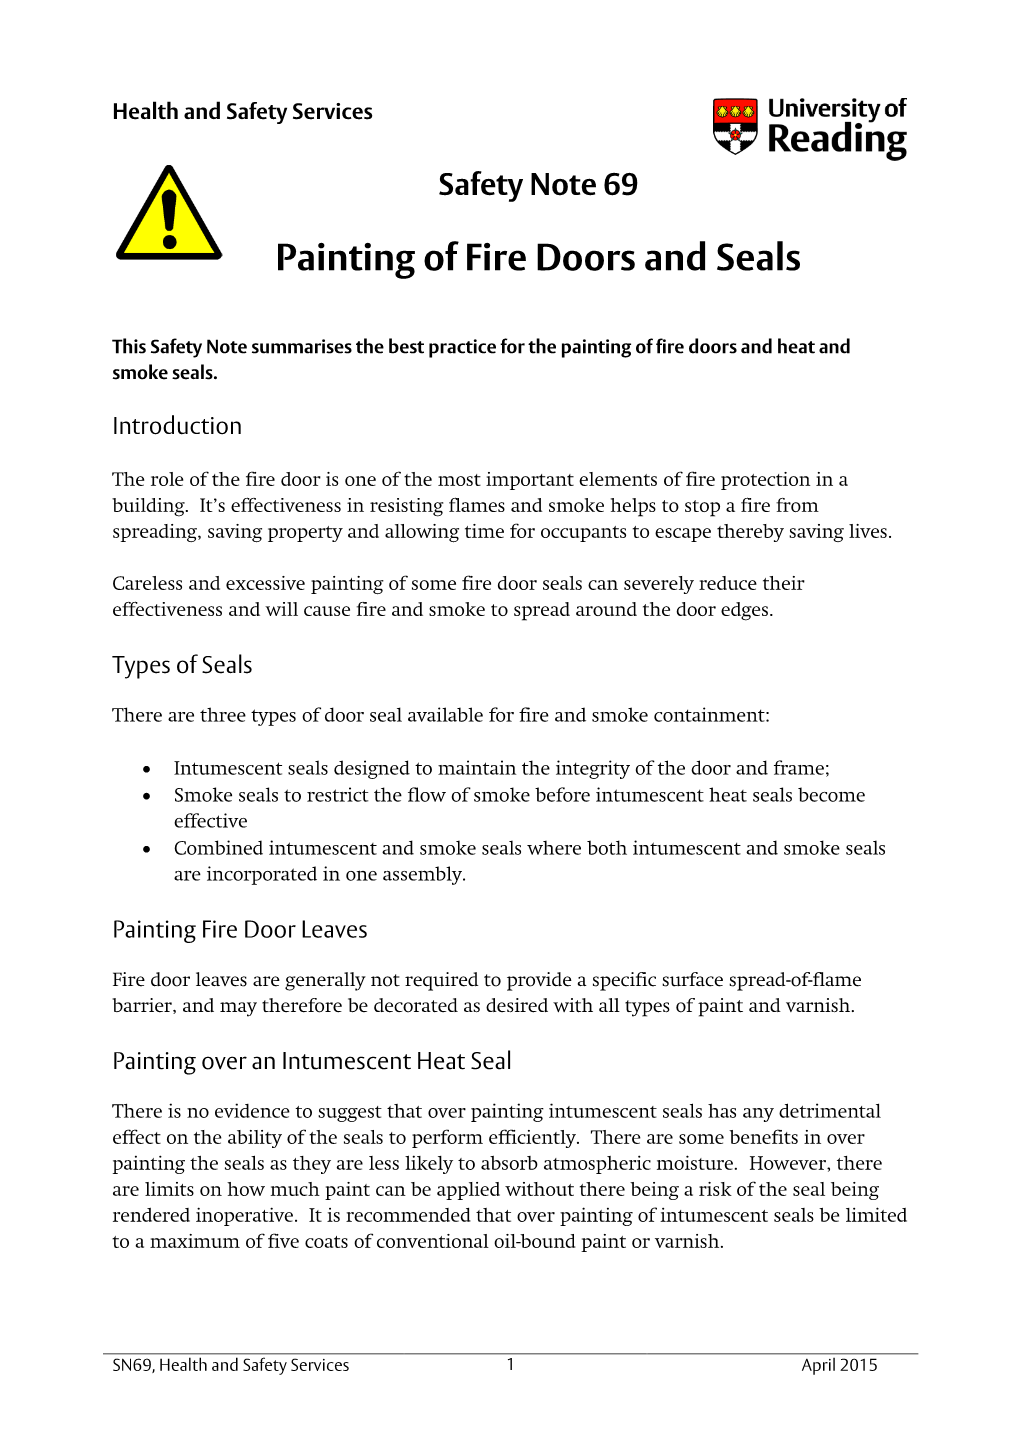 Painting of Fire Doors and Seals